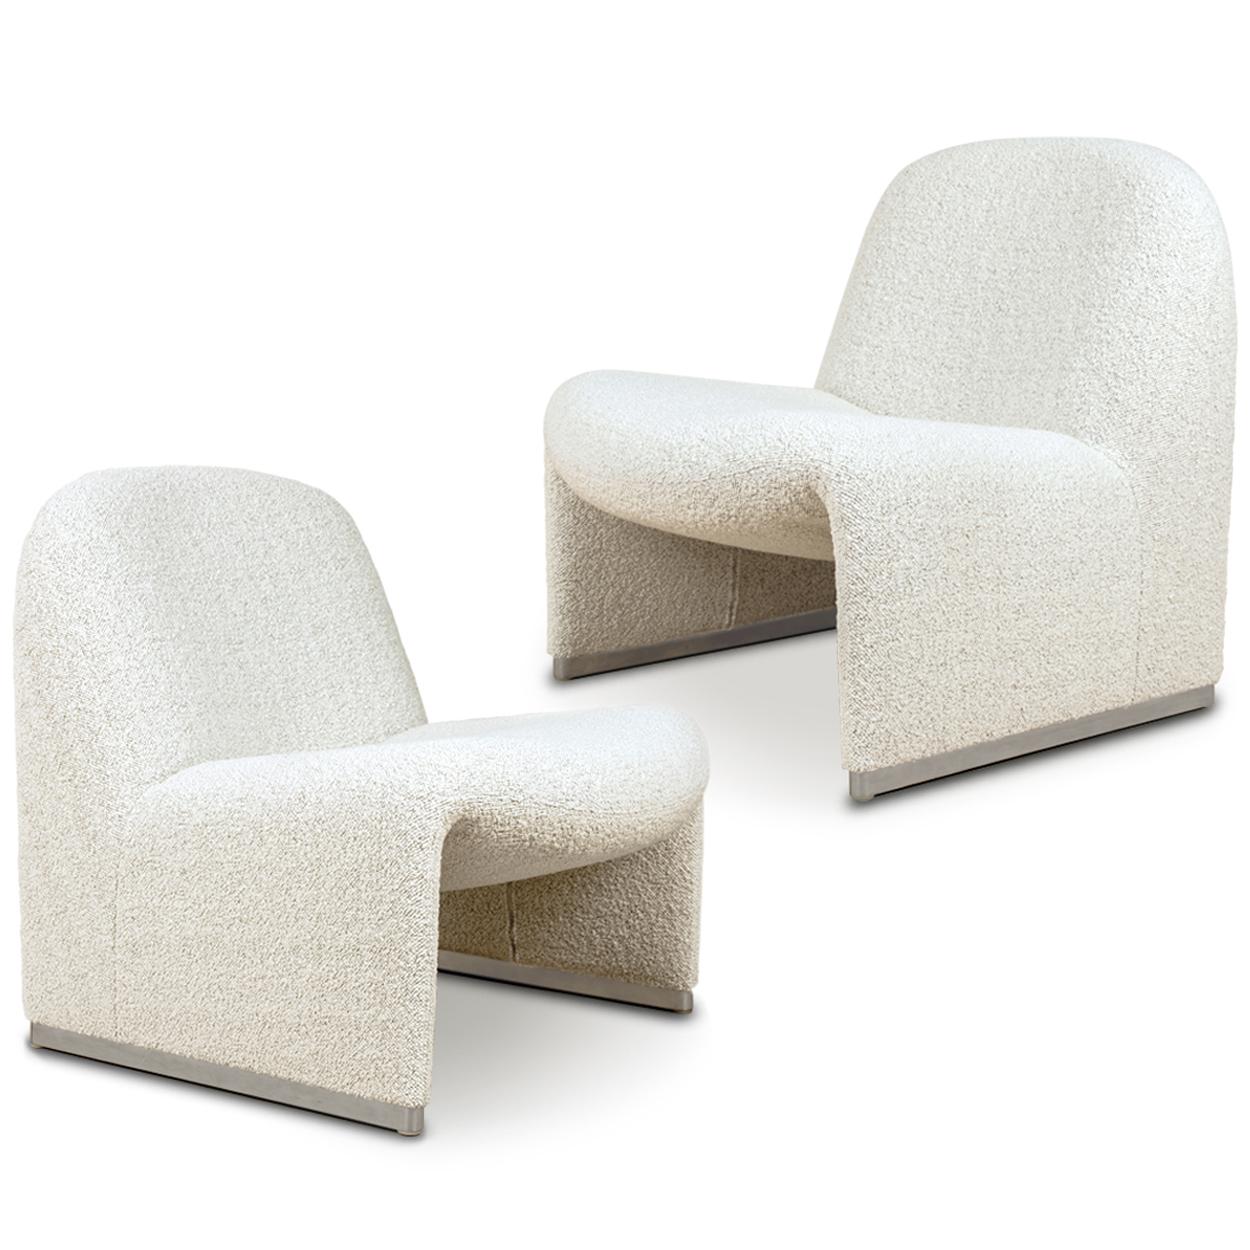 Alky Piretti Chairs, New Upholstered with Fabric Dedar, Italy 3